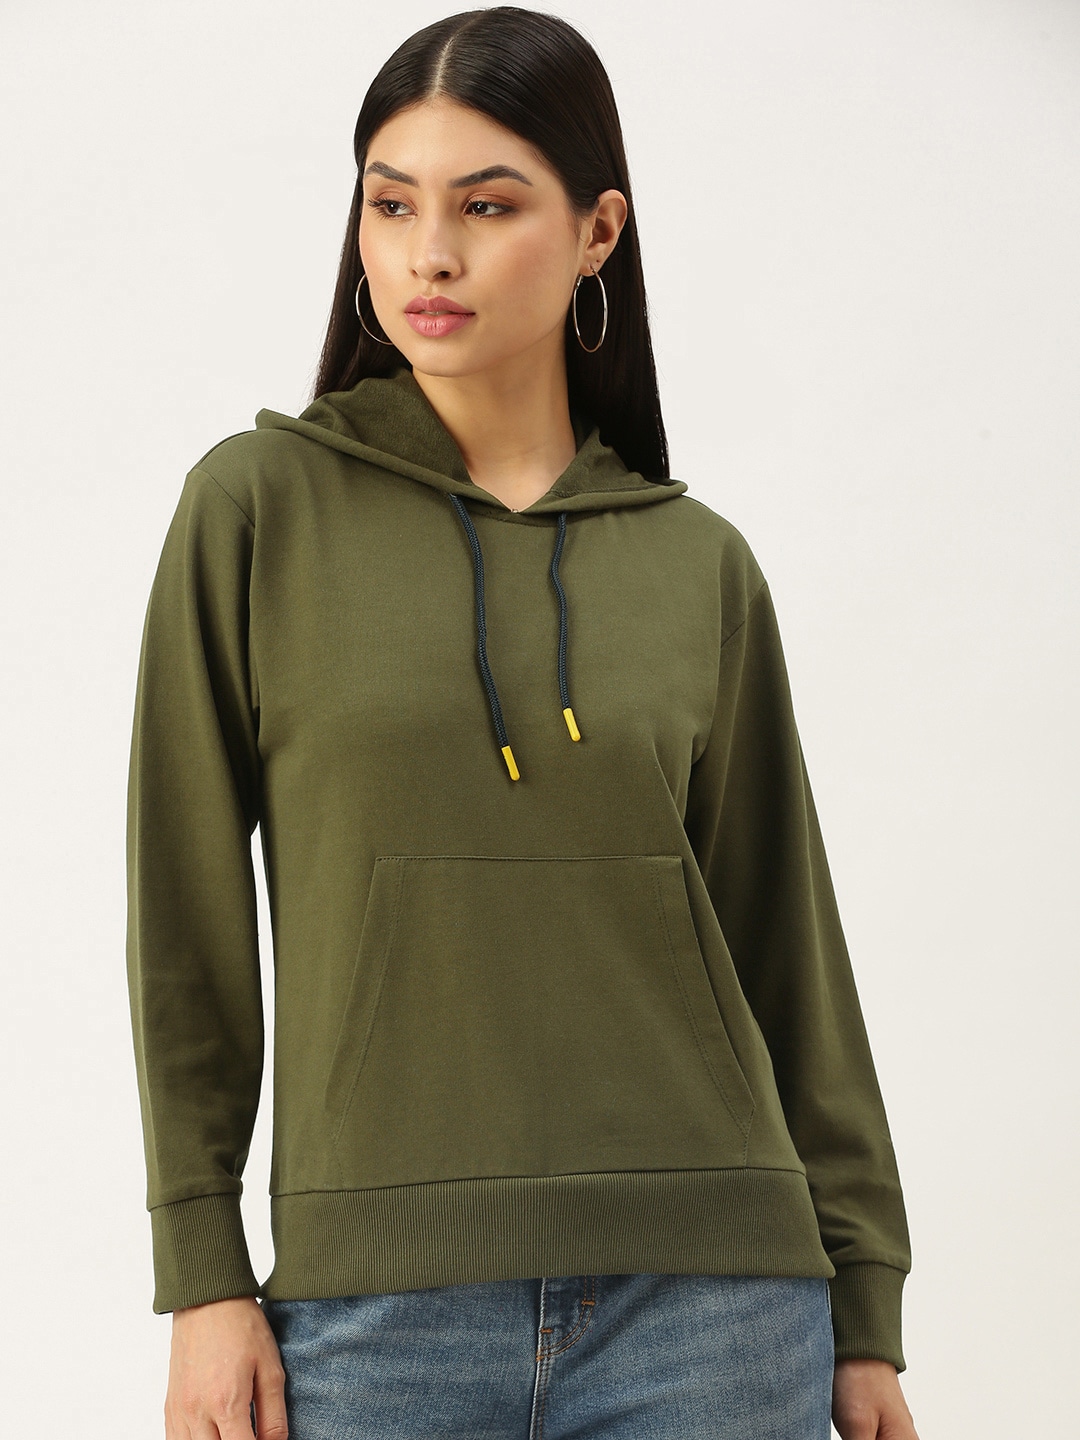 FOREVER 21 Women Olive Green Hooded Sweatshirt Price in India